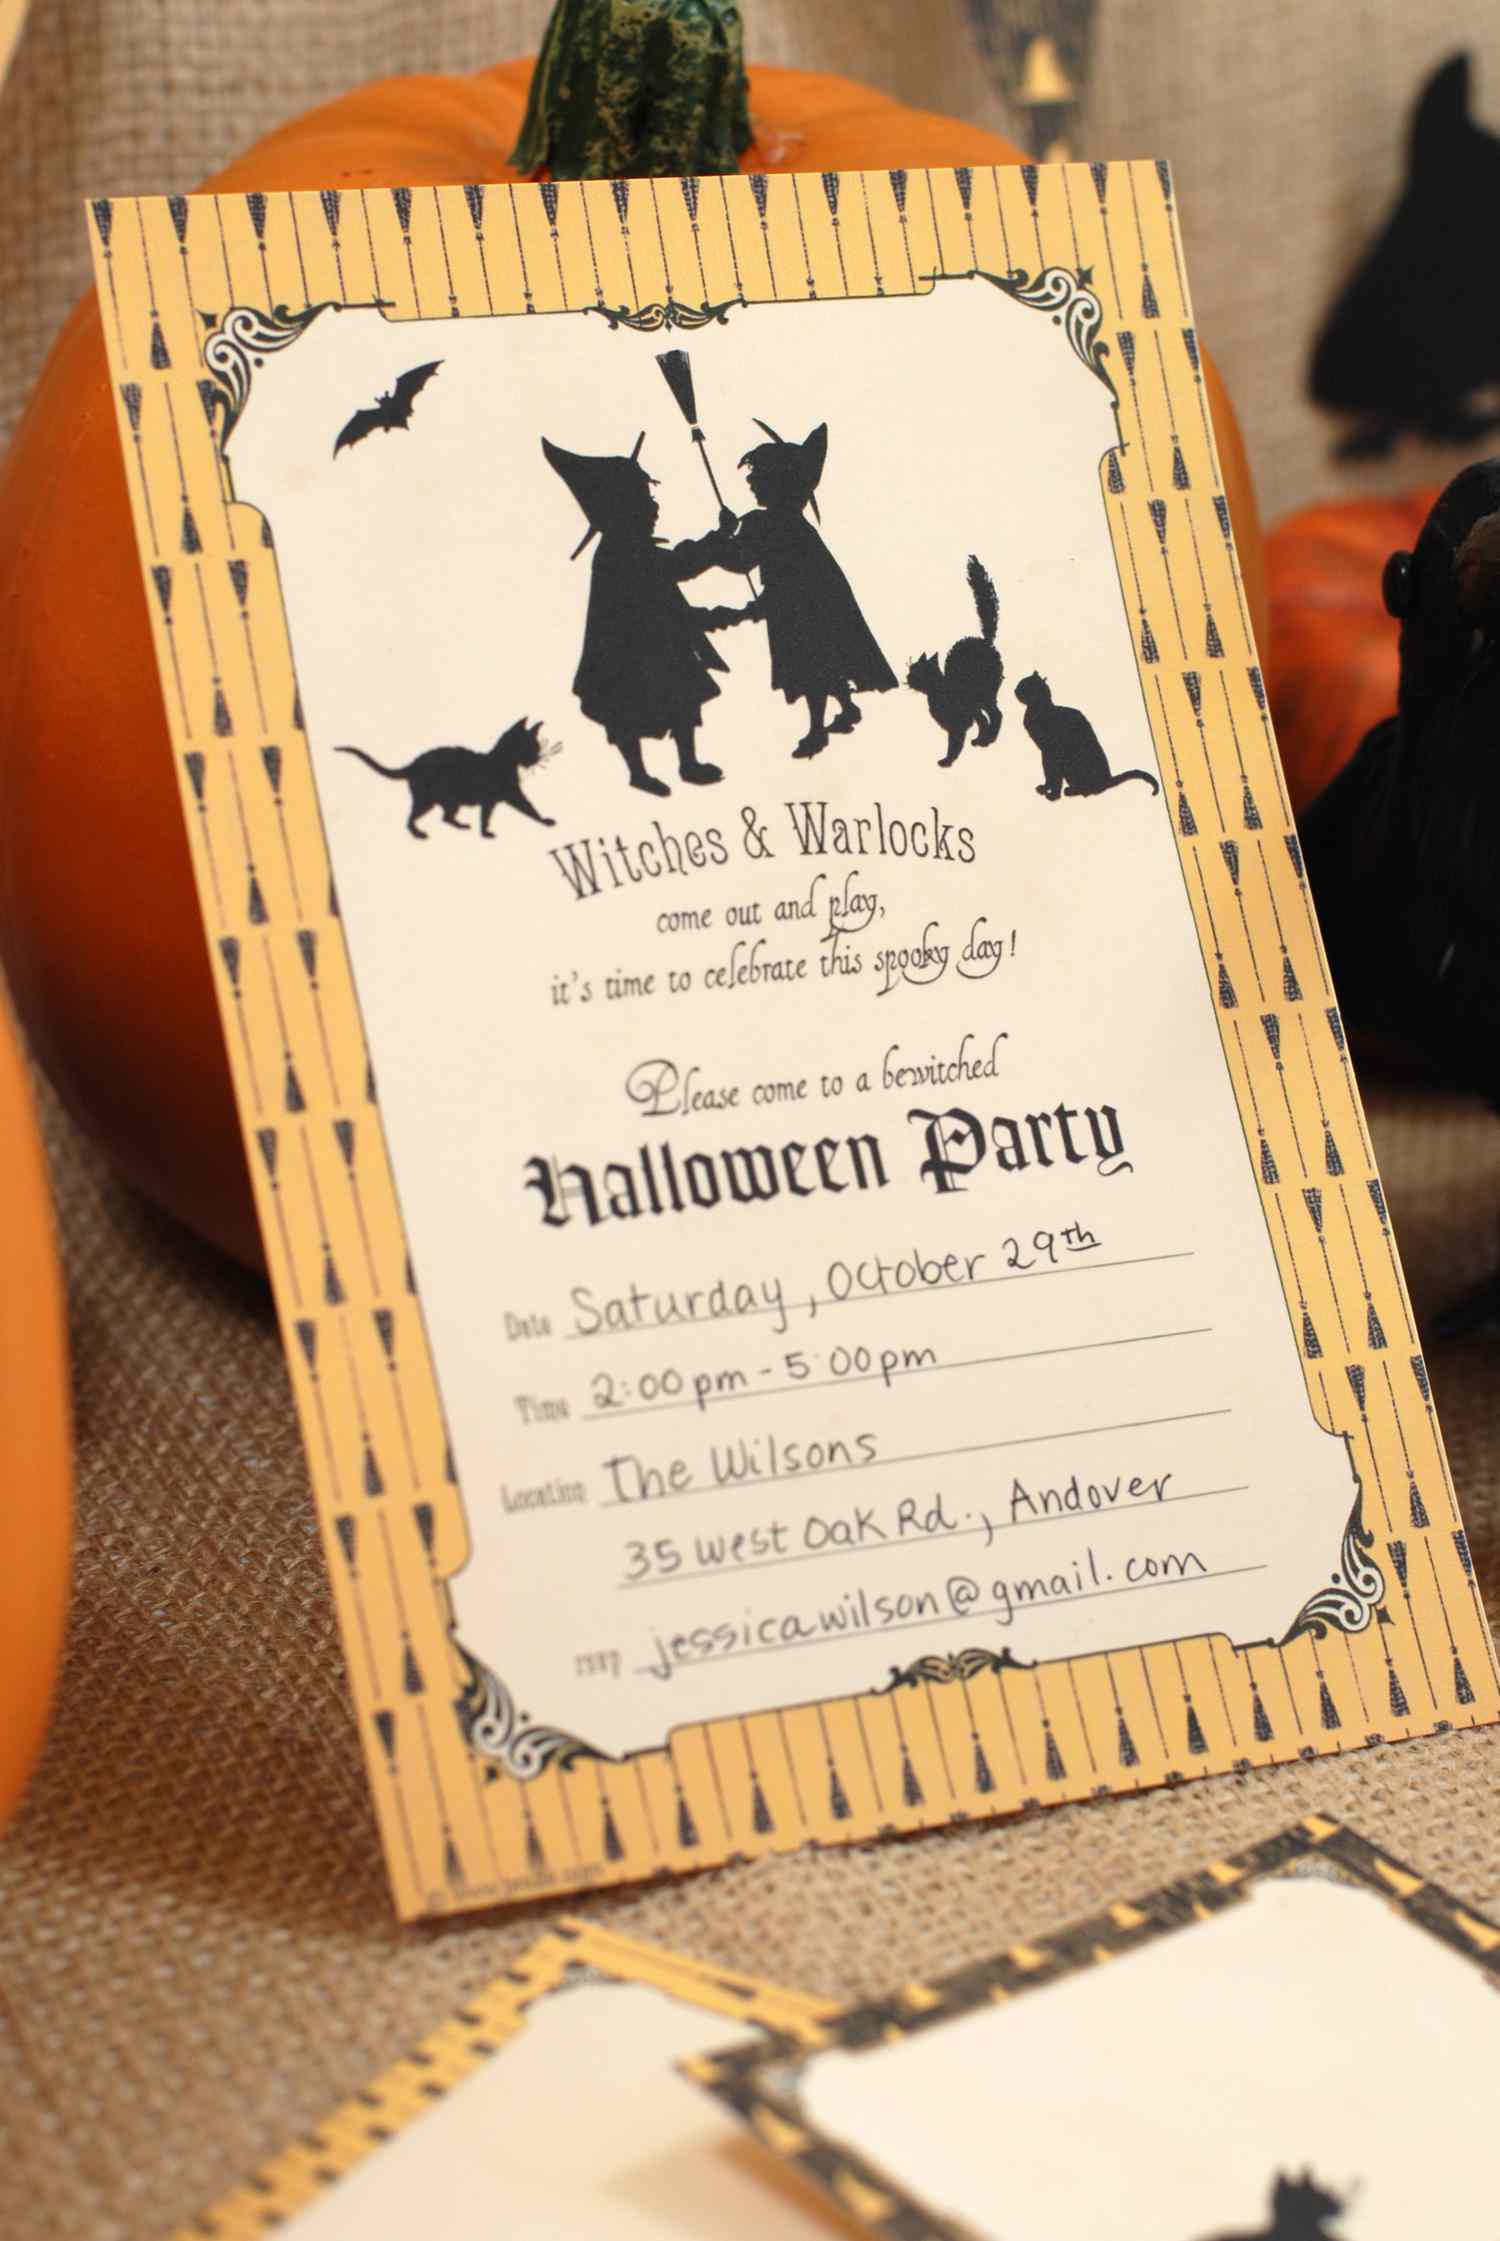 A Halloween Party Invitation Leaning Against a Pumpkin